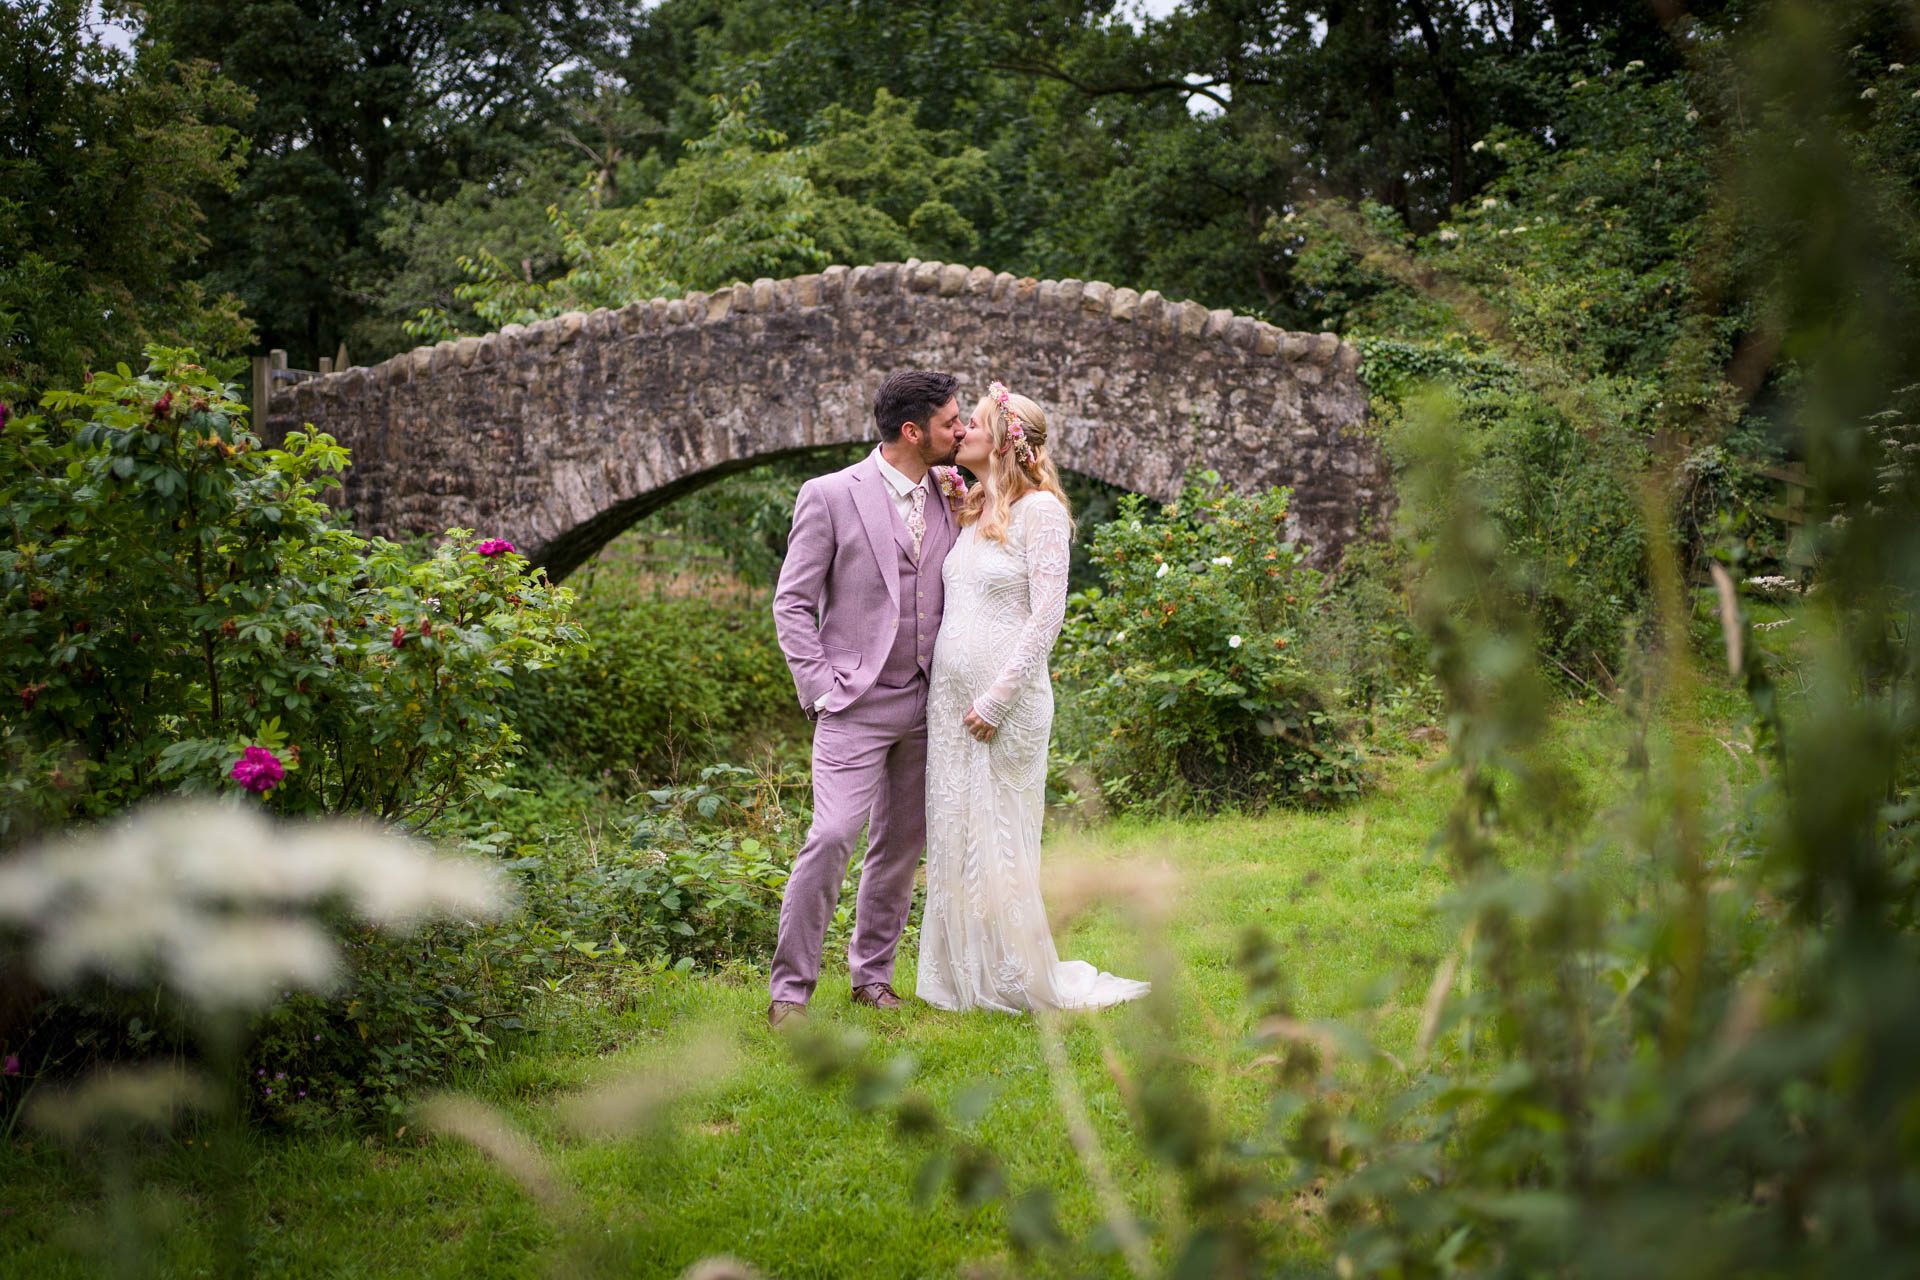 Wedding portrait at Ribble Valley wedding - bride and groom kissing in front of ancient arched stone bridge 